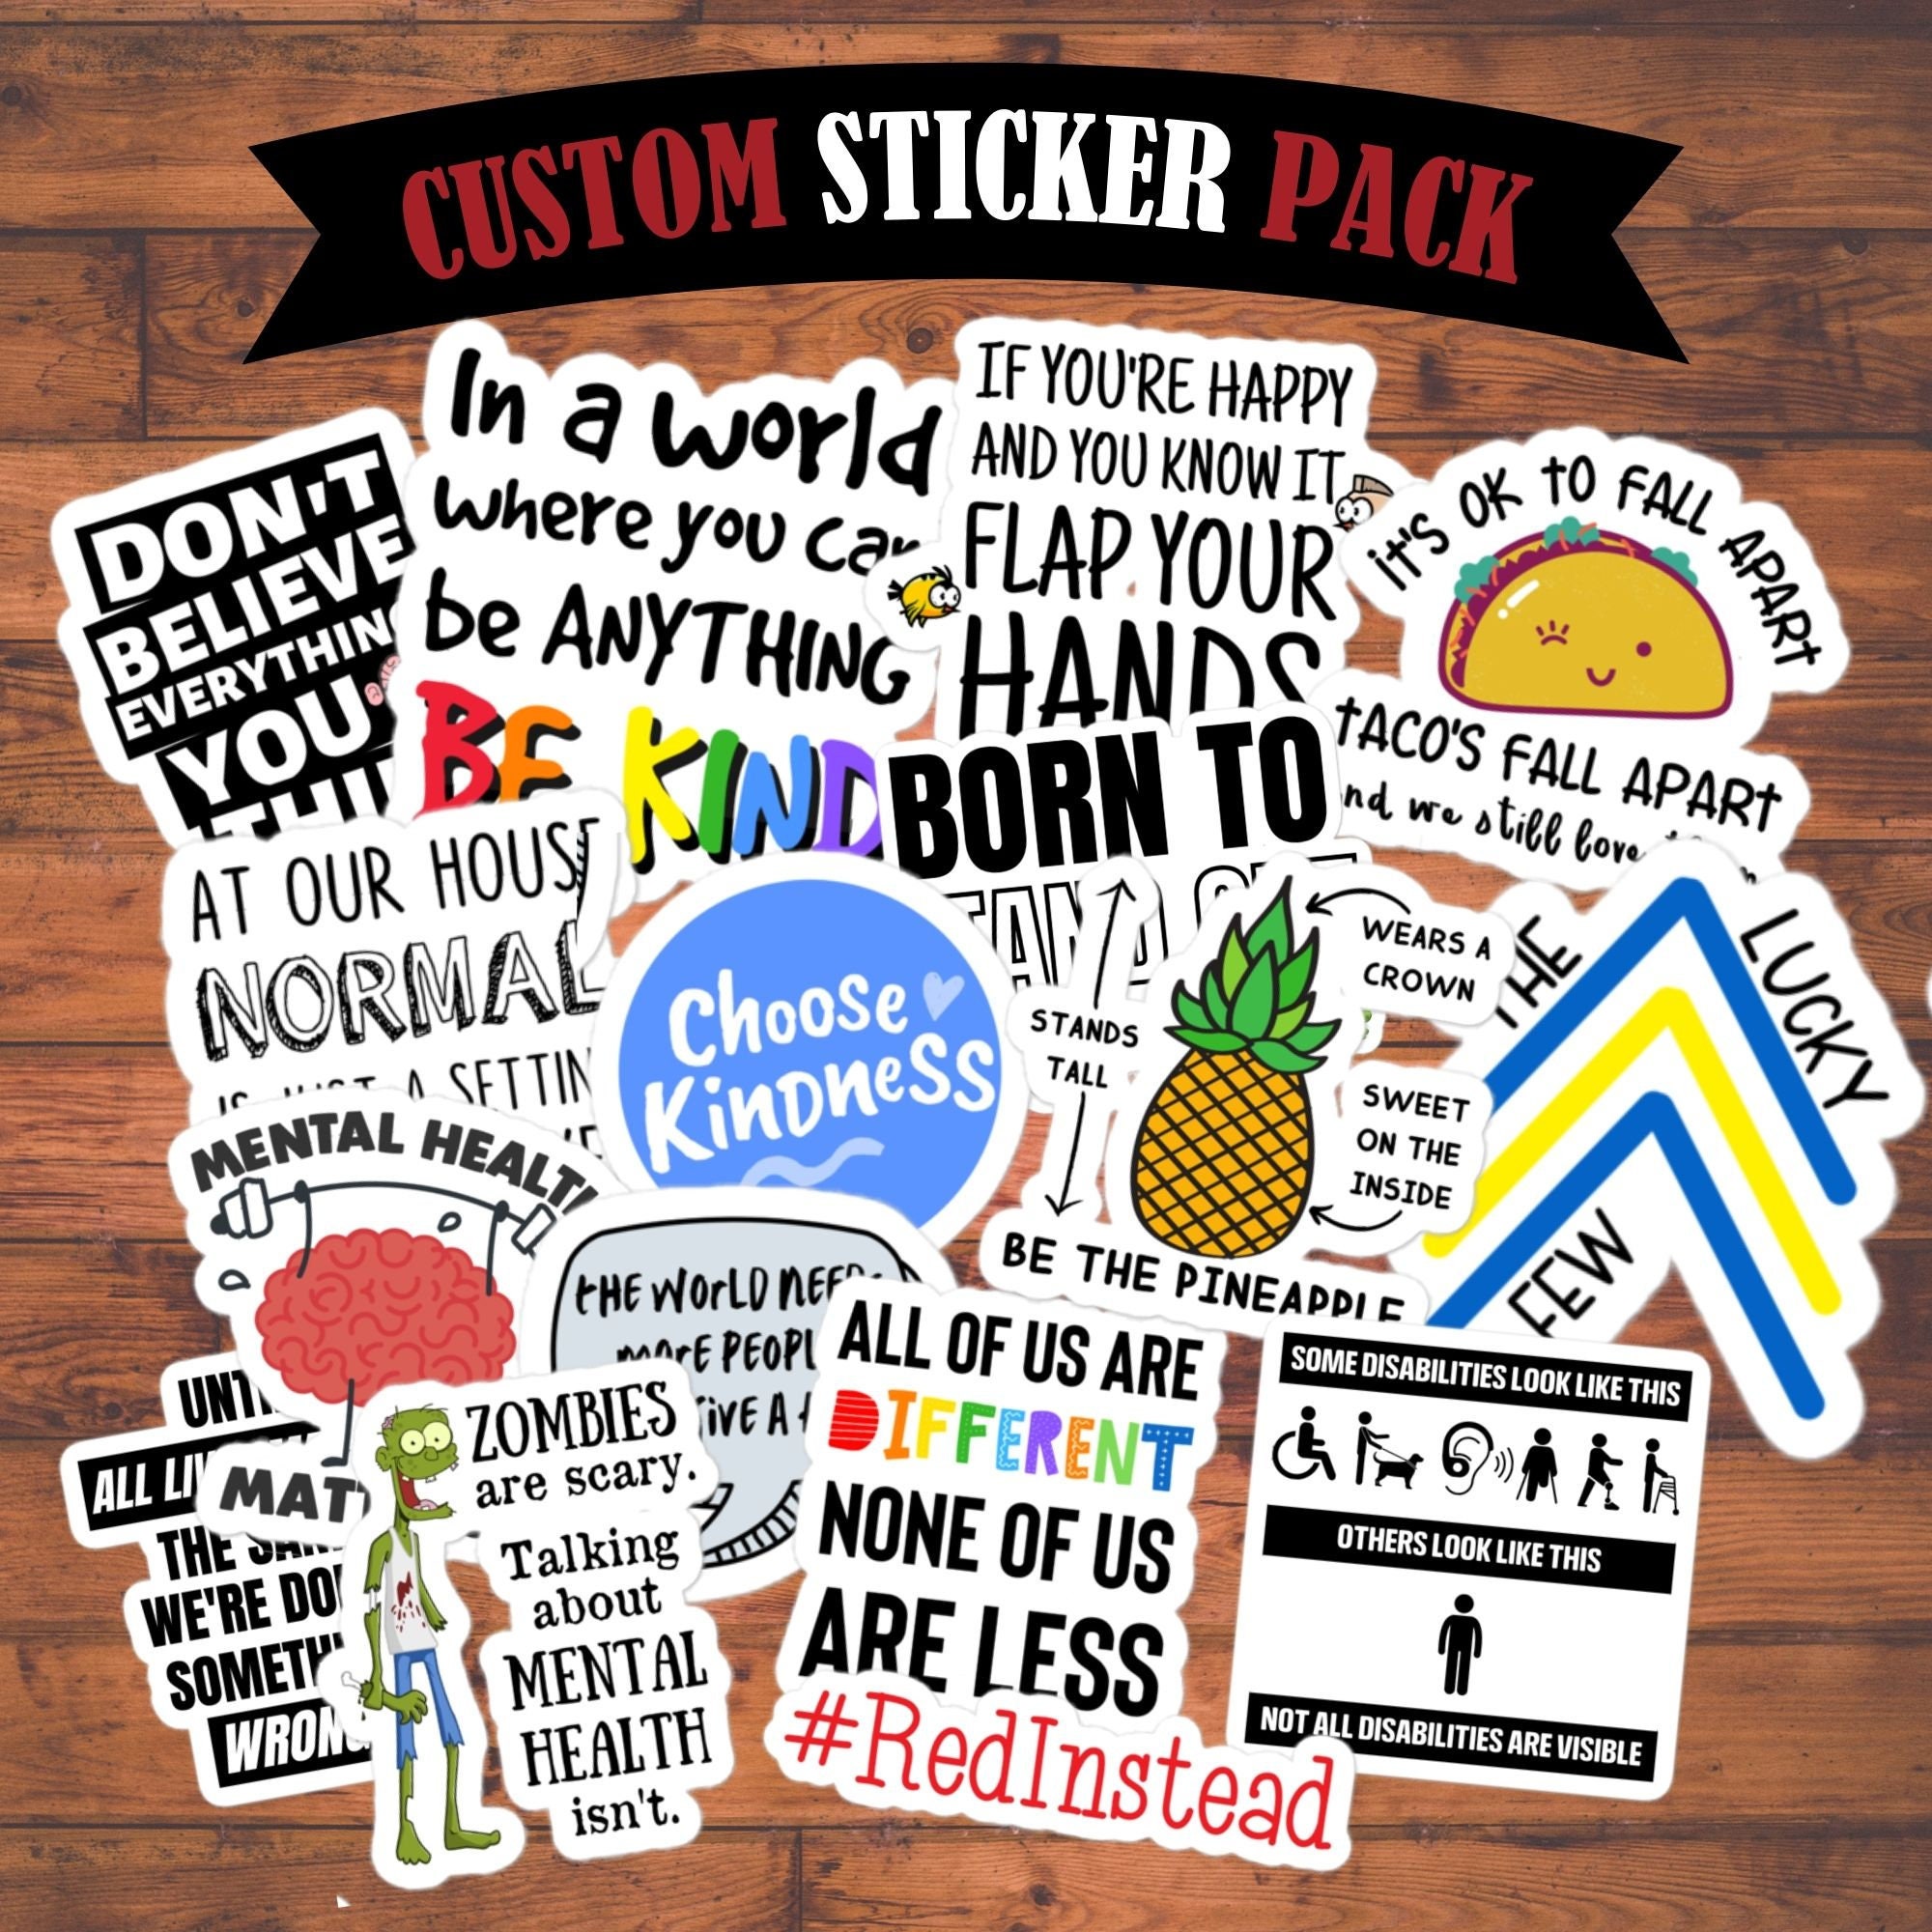 Chronically Cute Sticker Sheet A5 // Planner Stickers // Illustration  Stickers // Chronic Illness, Spoonie Stickers // Laptop Decals 